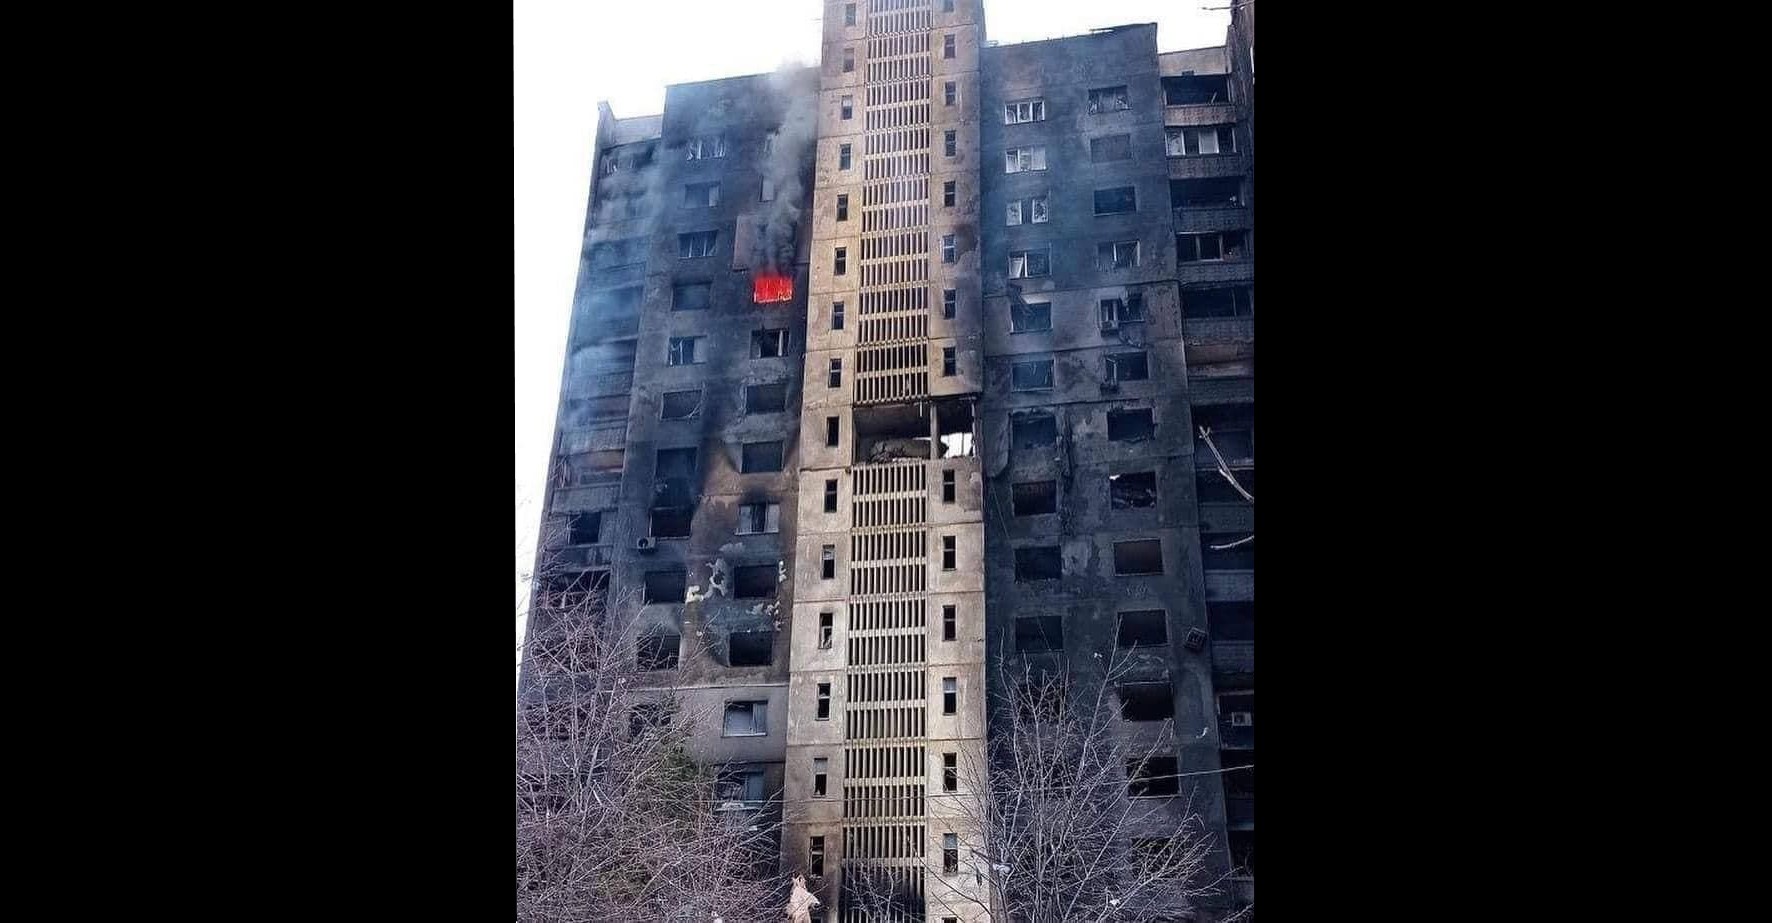 A residential building in Saltіvka, a suburb of the Ukrainian city of Kharkiv, after bombardment by the Russian military. March 9, 2022. The Russo-Ukrainian War (2014-present). Credit: Ukrainian Freedom